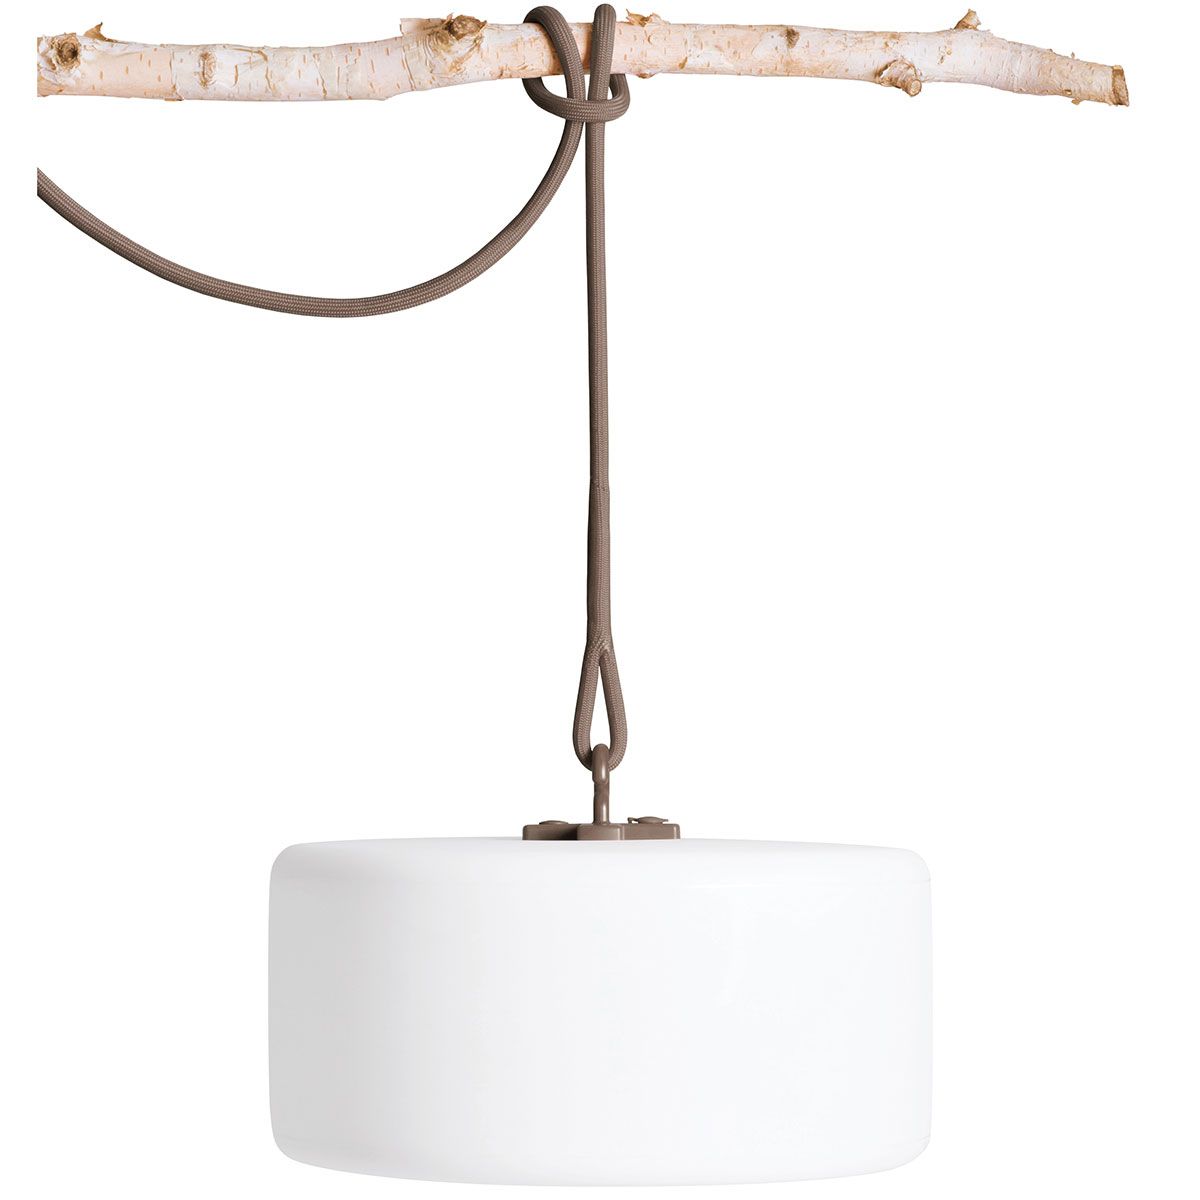 Fatboy Thierry le swinger lampe taupe